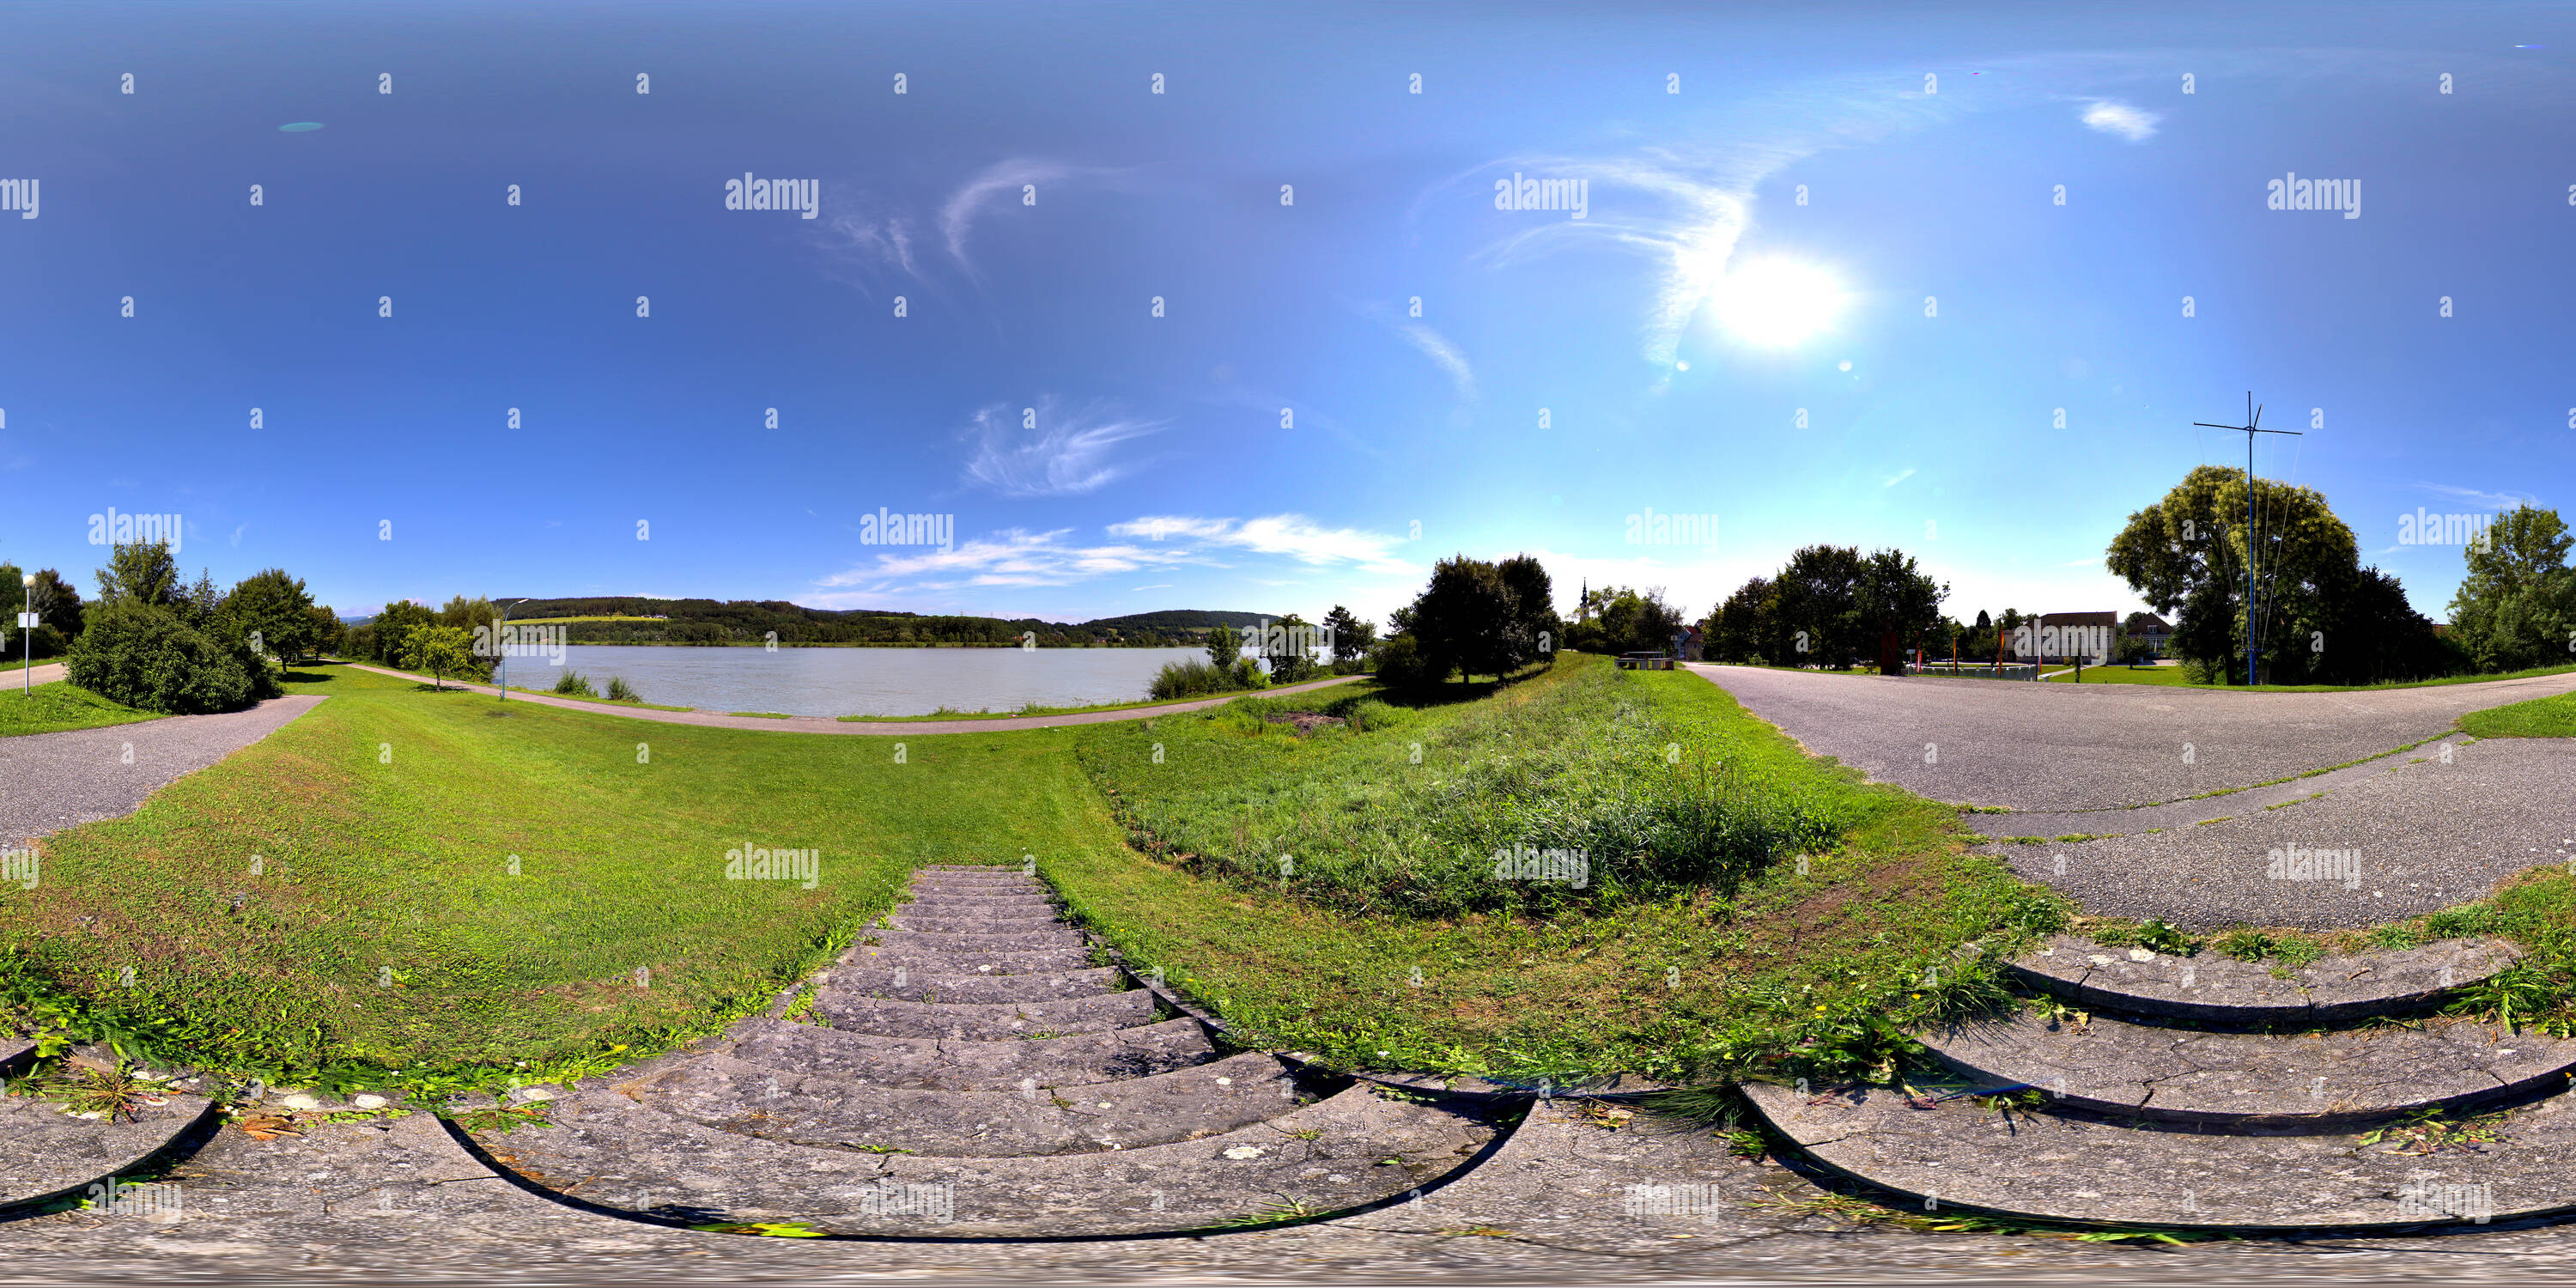 360 degree panoramic view of Austria, Pöchlarn, Donau